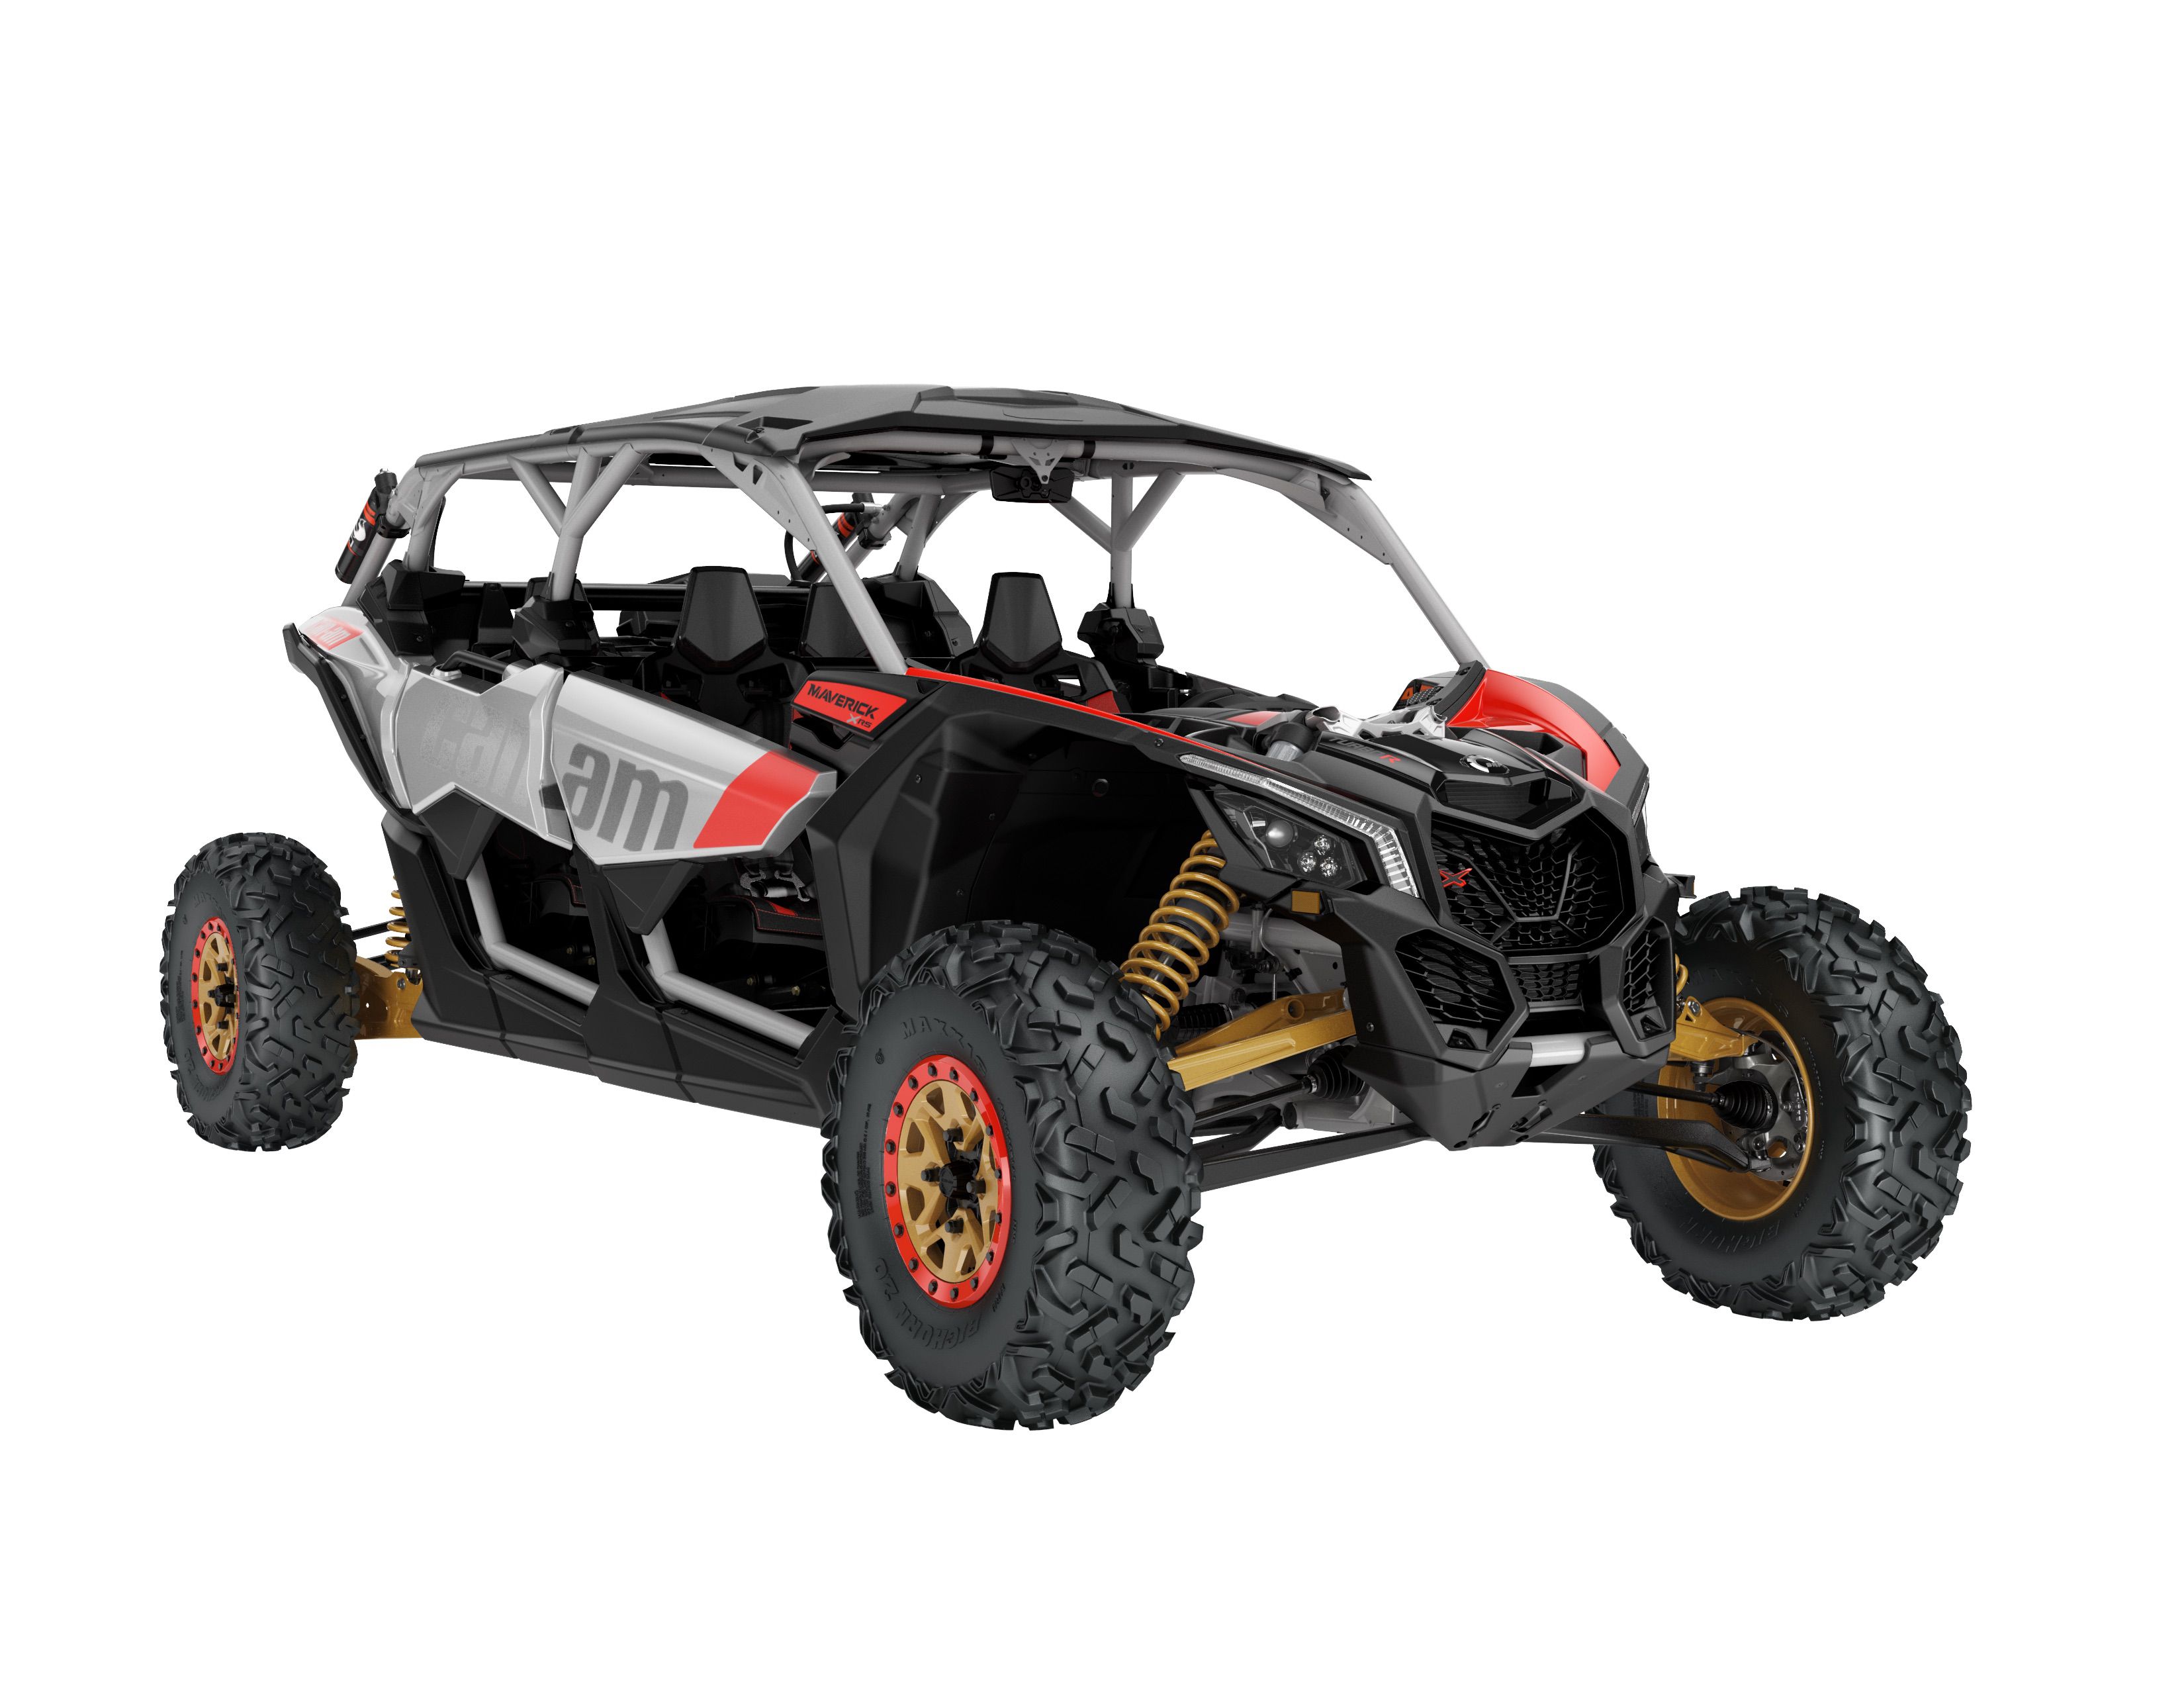 How Much is a Can-Am ATV?